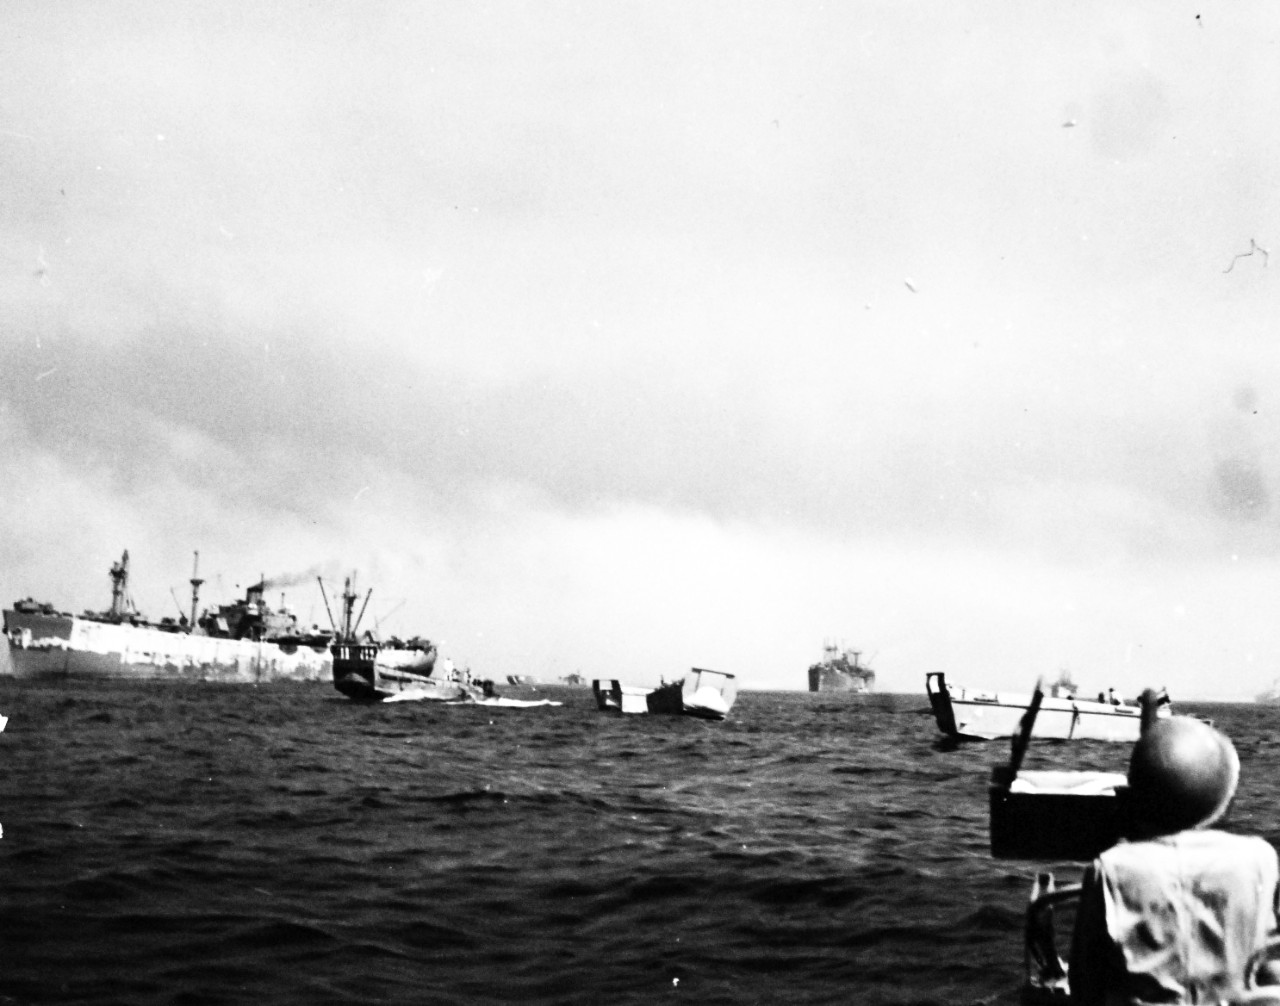 Operation Avalanche, September 1943.  Scene from LCI(L) during daylight air raid, showing small craft disbursing during the Allied invasion at Salerno, Italy.  Photograph released September 12, 1943.   U.S. Navy photograph, now in the collections of the National Archives.  (2017/04/04).